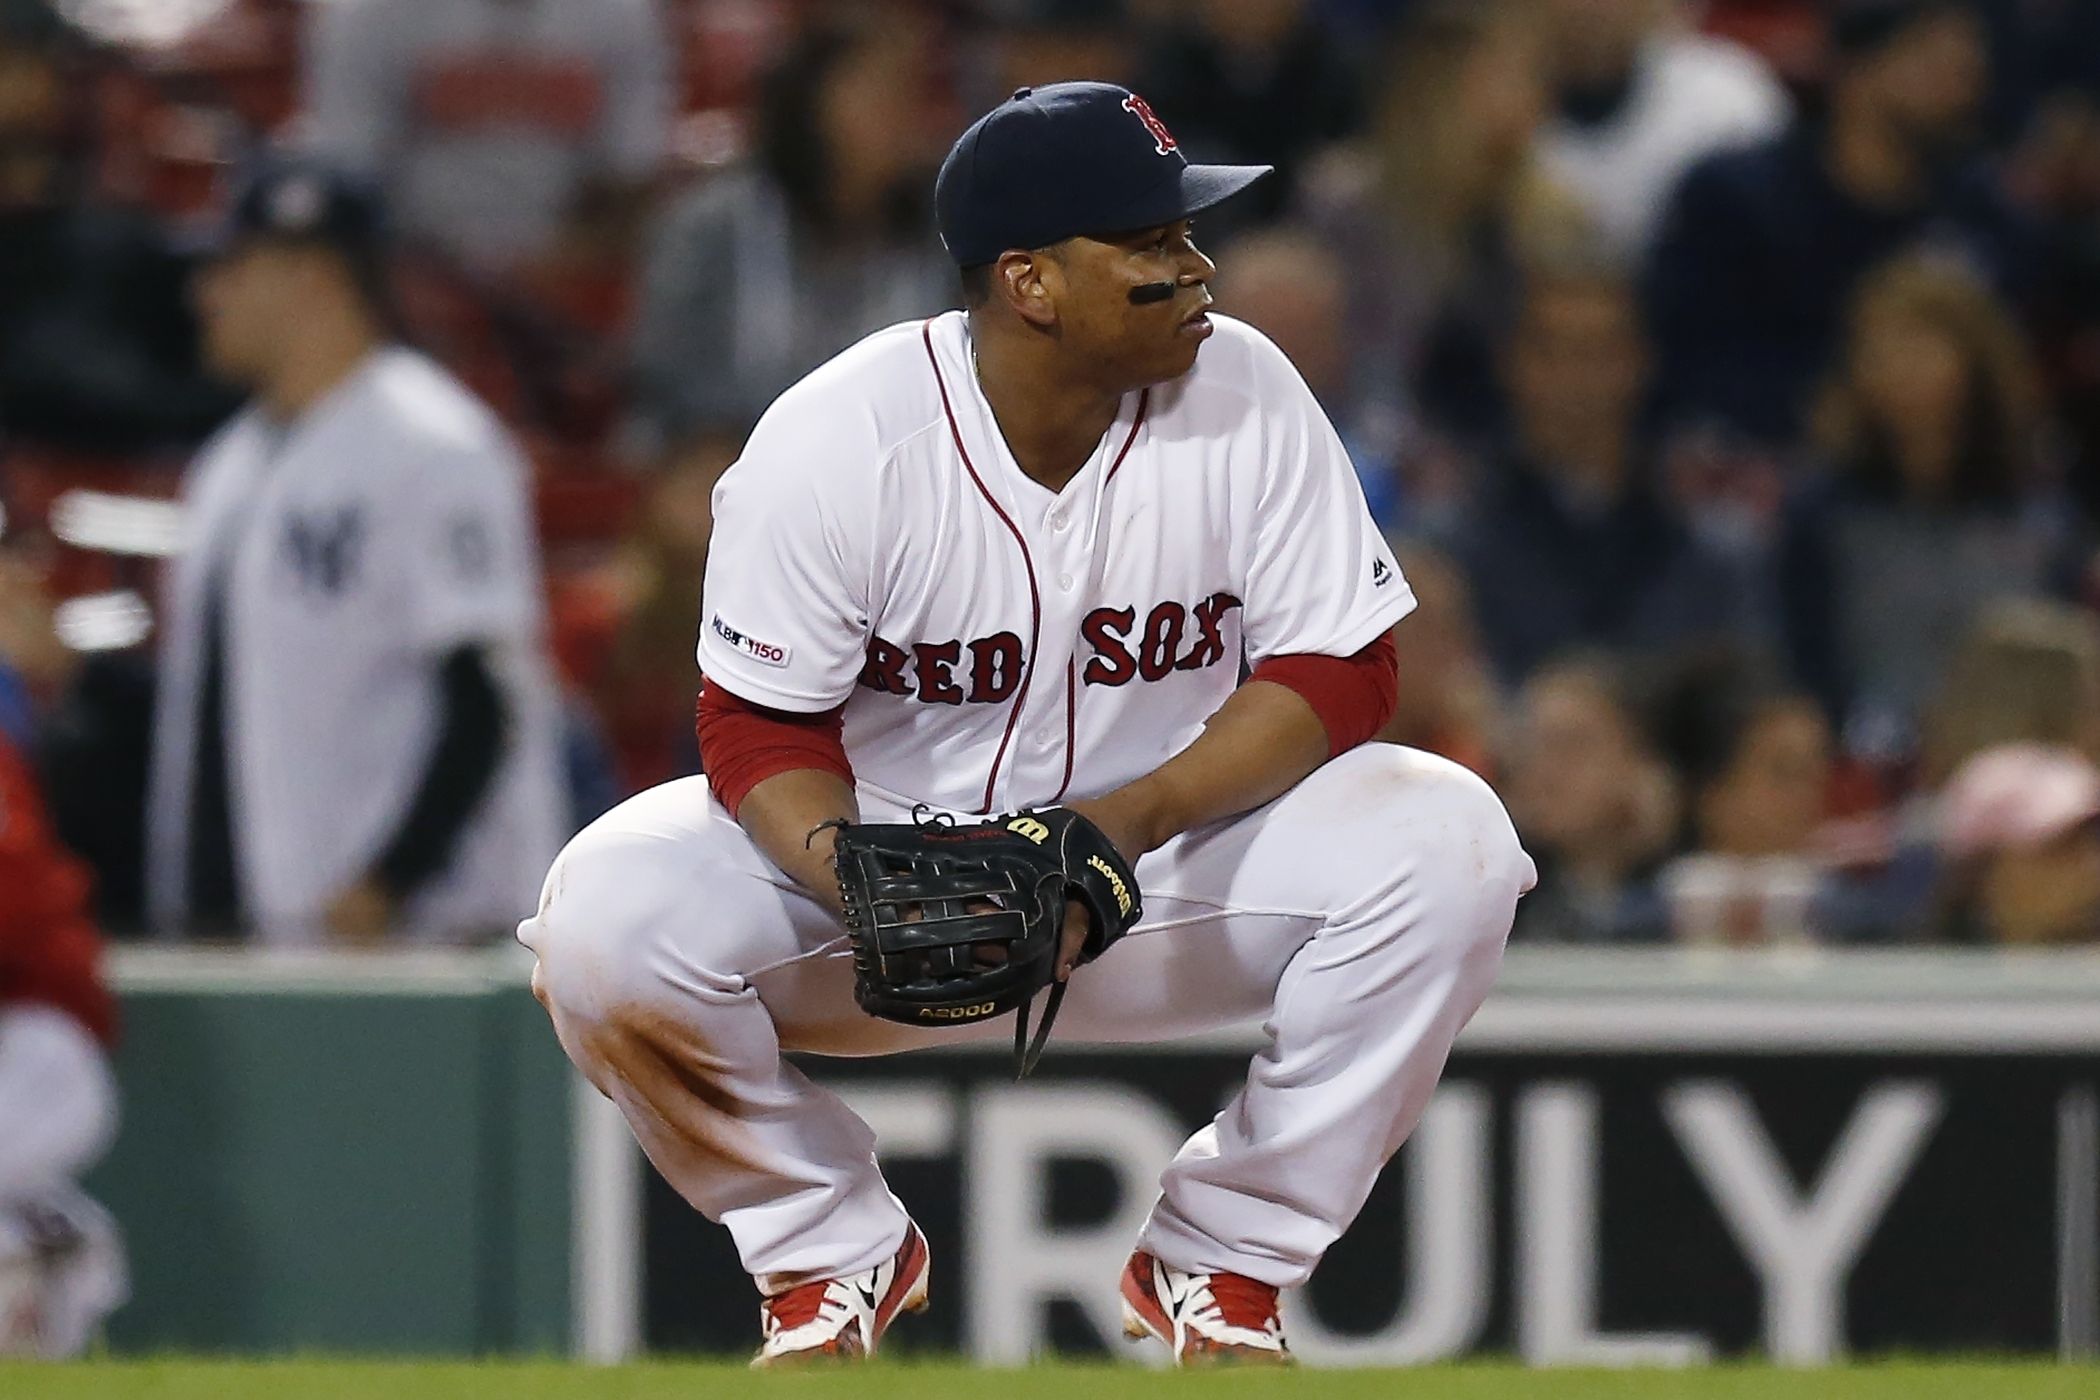 Rafael Devers struggles to sort out the error of his ways - The Boston Globe